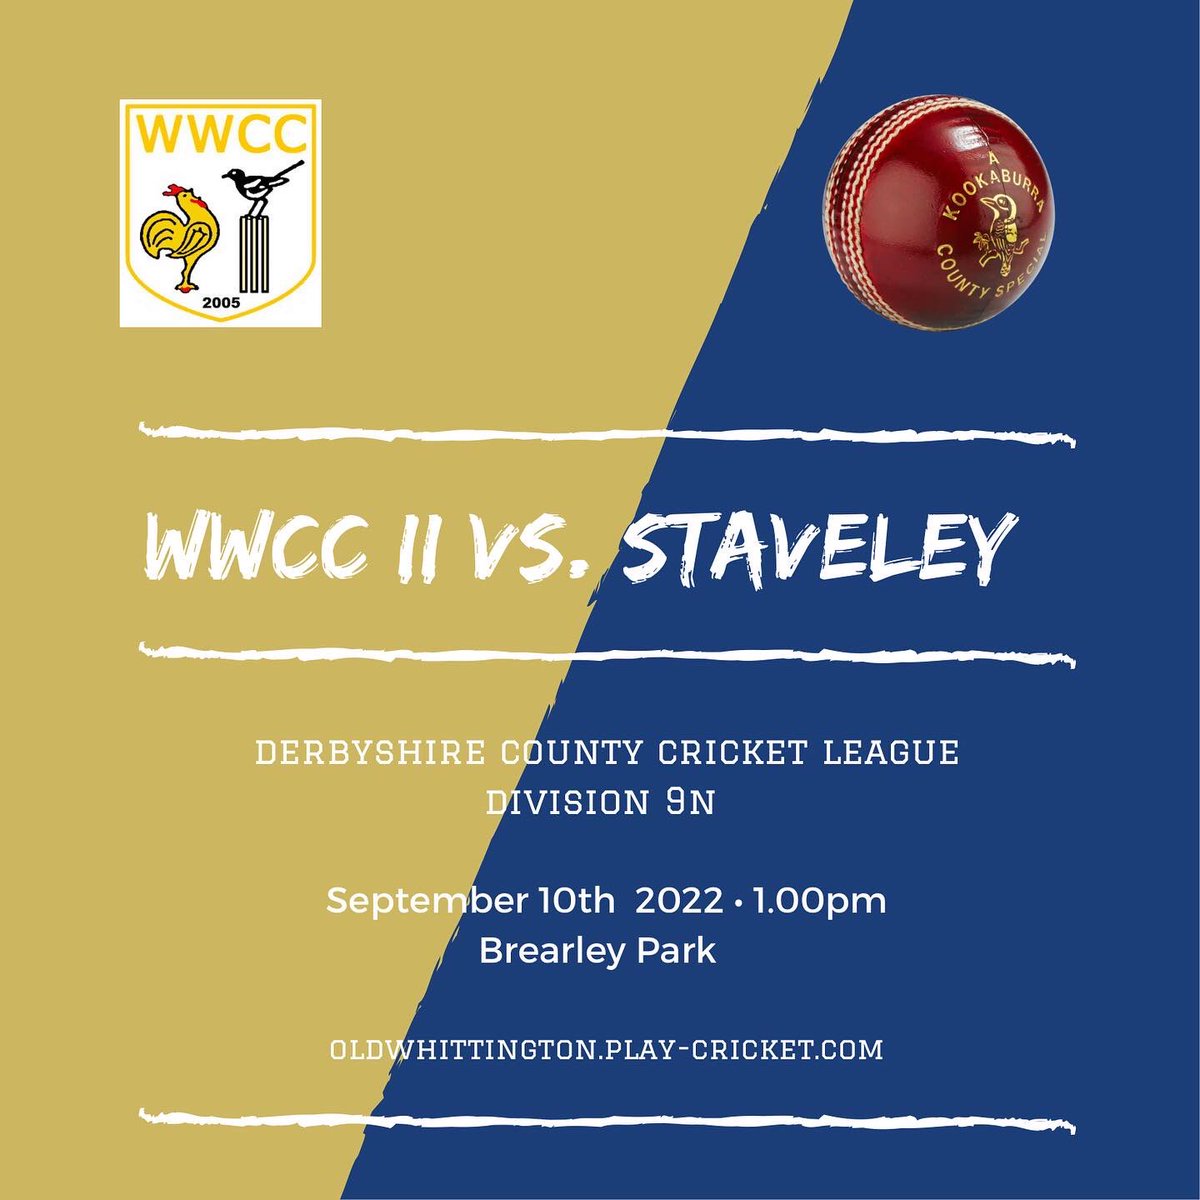 Following guidance from @ECB_cricket and @DerbysCountyLge our games against @StaveleyWelfare will go ahead as planned. We will of course pay our respects to Queen Elizabeth before commencing play.